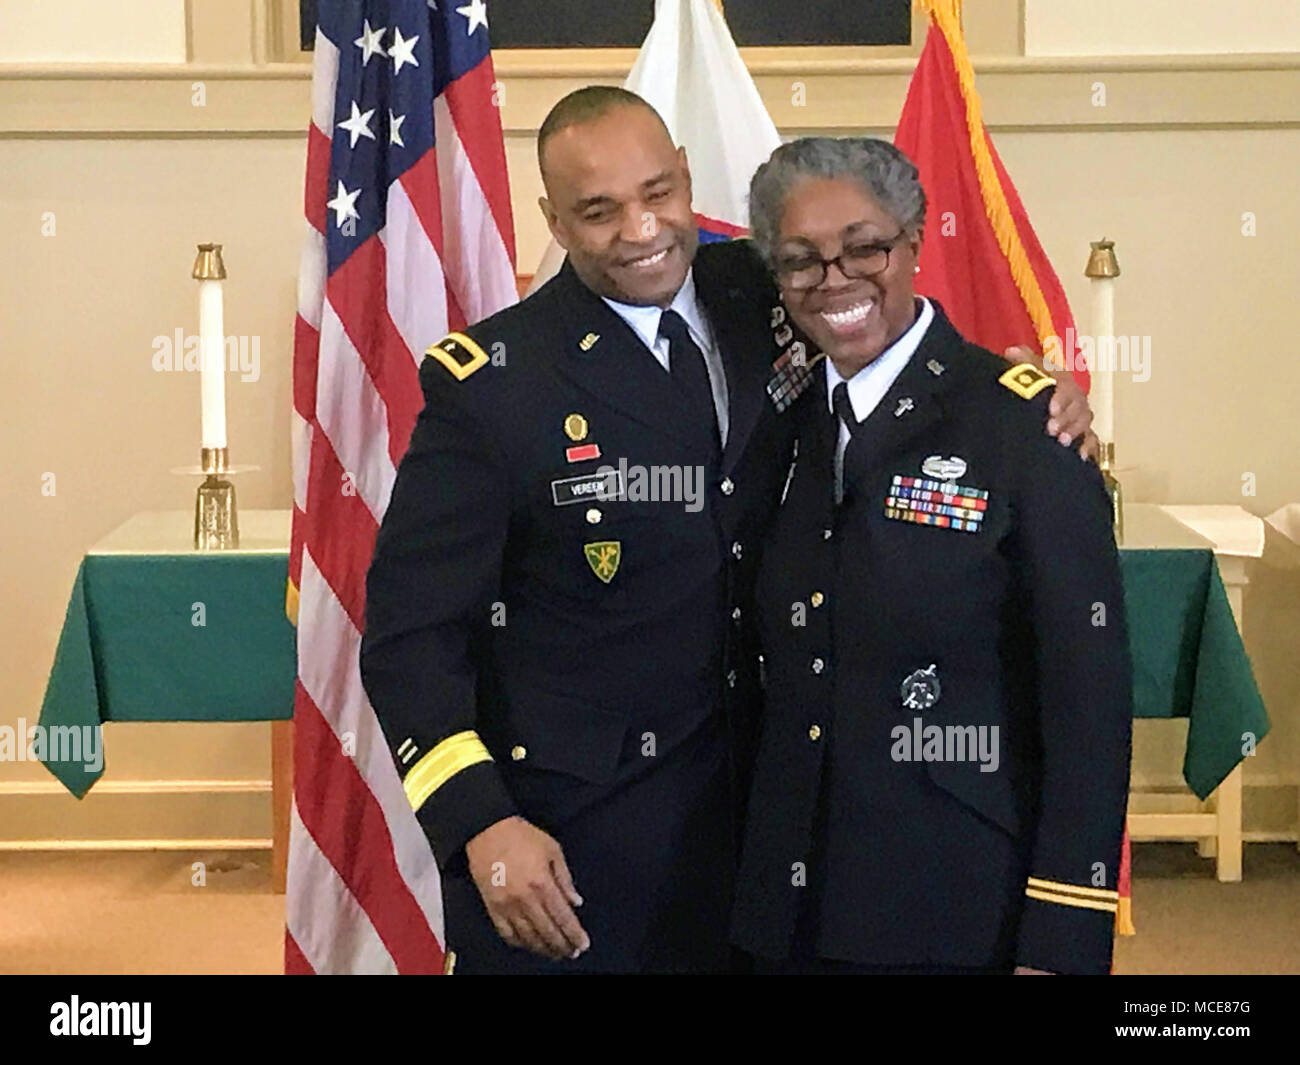 (l. to r.) Brig. Gen. Kevin Vereen, U.S. Army Recruiting Command Operations deputy commanding general, congratulates Chaplain (Maj.) Sharon Browne, a recruiter with the Southcentral Army Chaplain Recruiting Center, 5th Medical Recruiting Battalion, after making her promotion to major official in a ceremony Feb. 9 at the Robert P. Taylor Memorial Chapel on Naval Air Station Joint Reserve Base-Fort Worth, Texas. Stock Photo